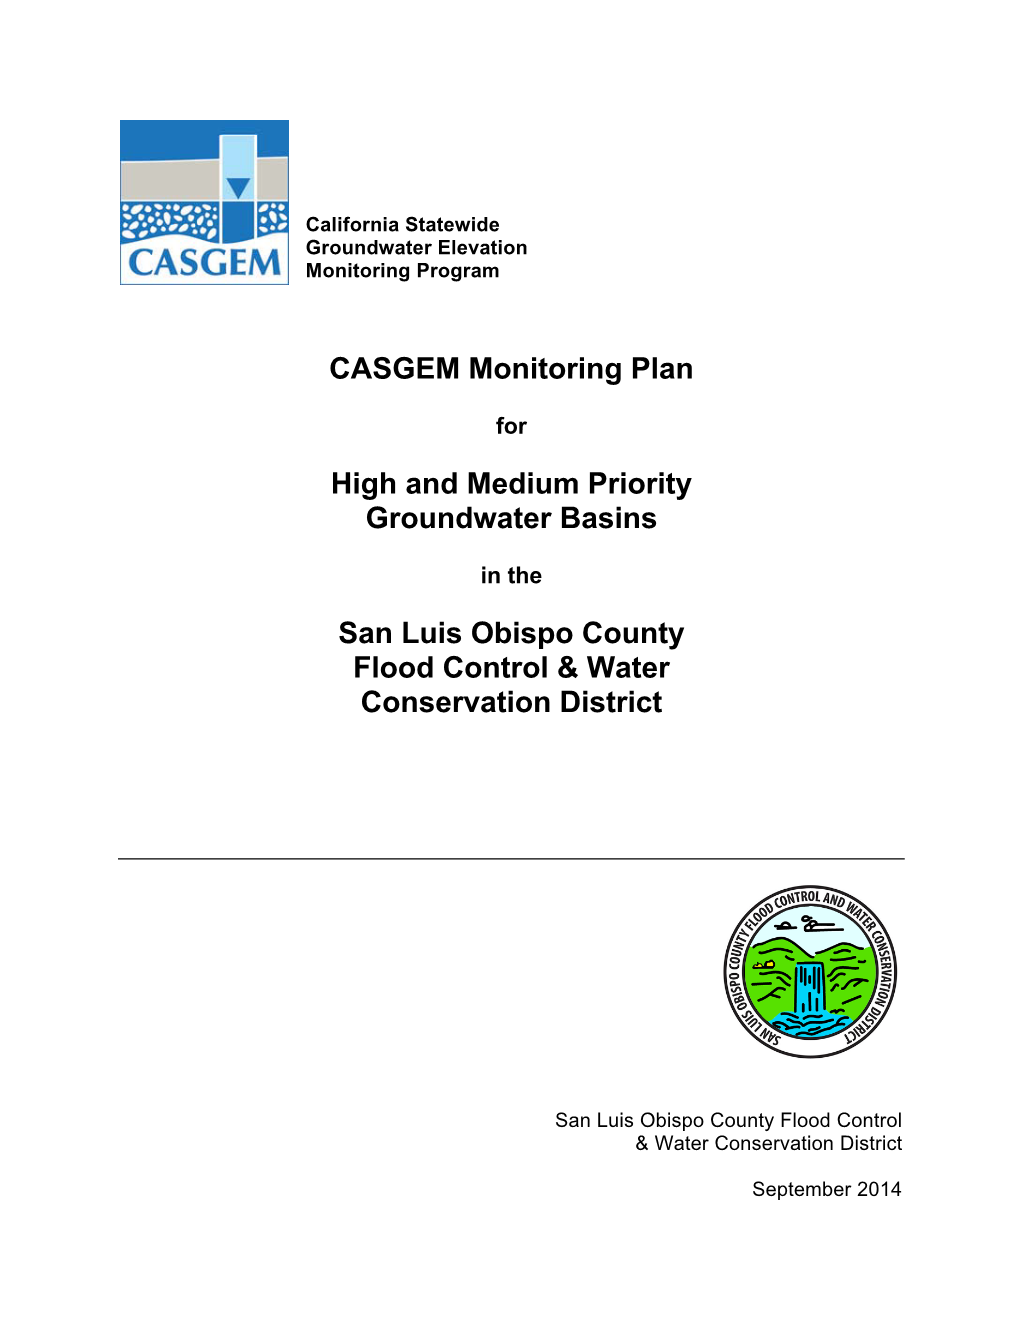 2014 Casgem Monitoring Plan for High and Medium Priority